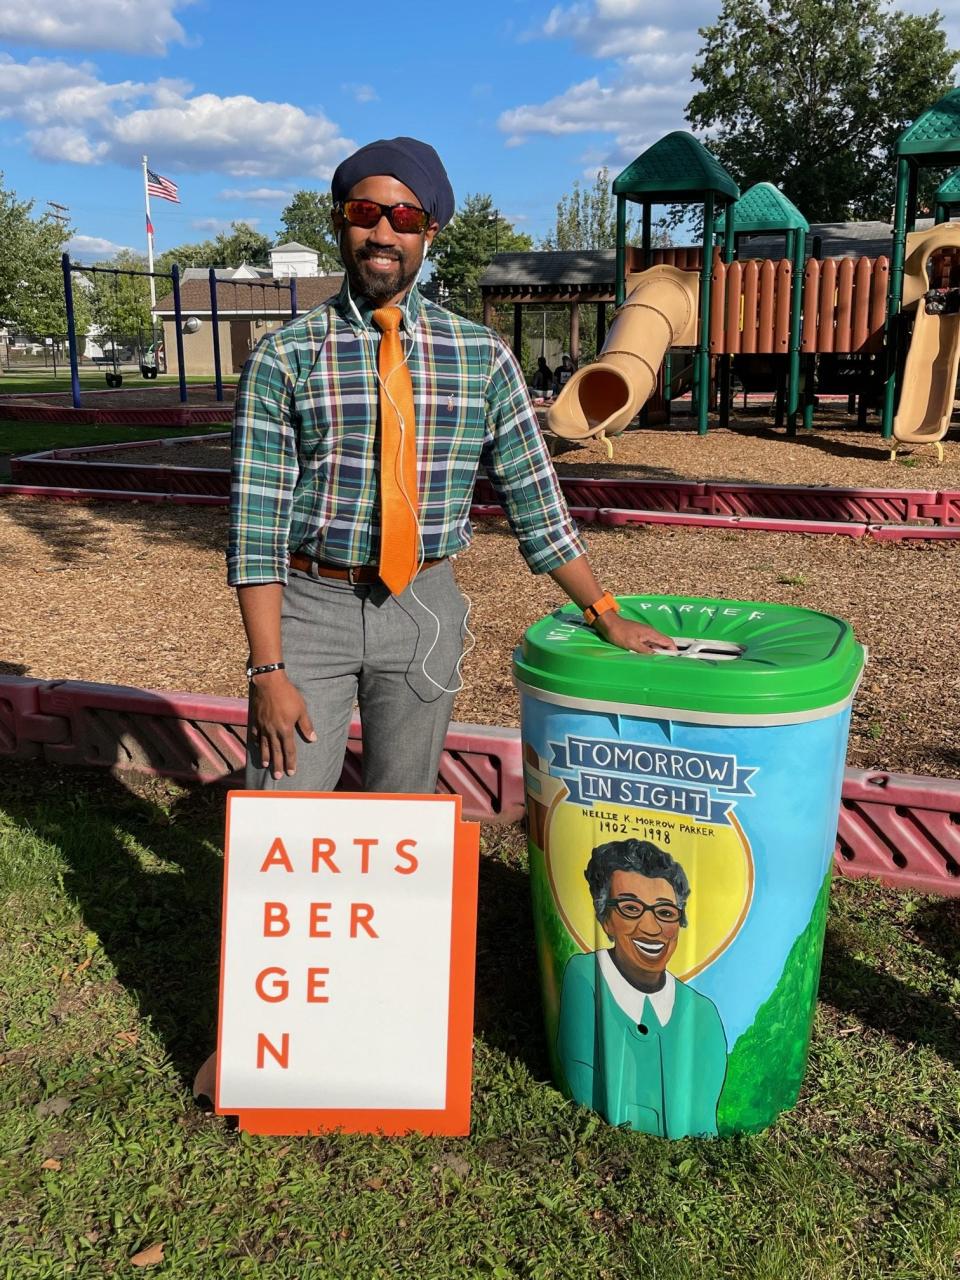 A painted rain barrel, "Tomorrow In/Sight," was designed by artist Toney Jackson and dedicated to Nellie K. Morrow Parker, a Hackensack teacher and the first African American teacher in Bergen County.